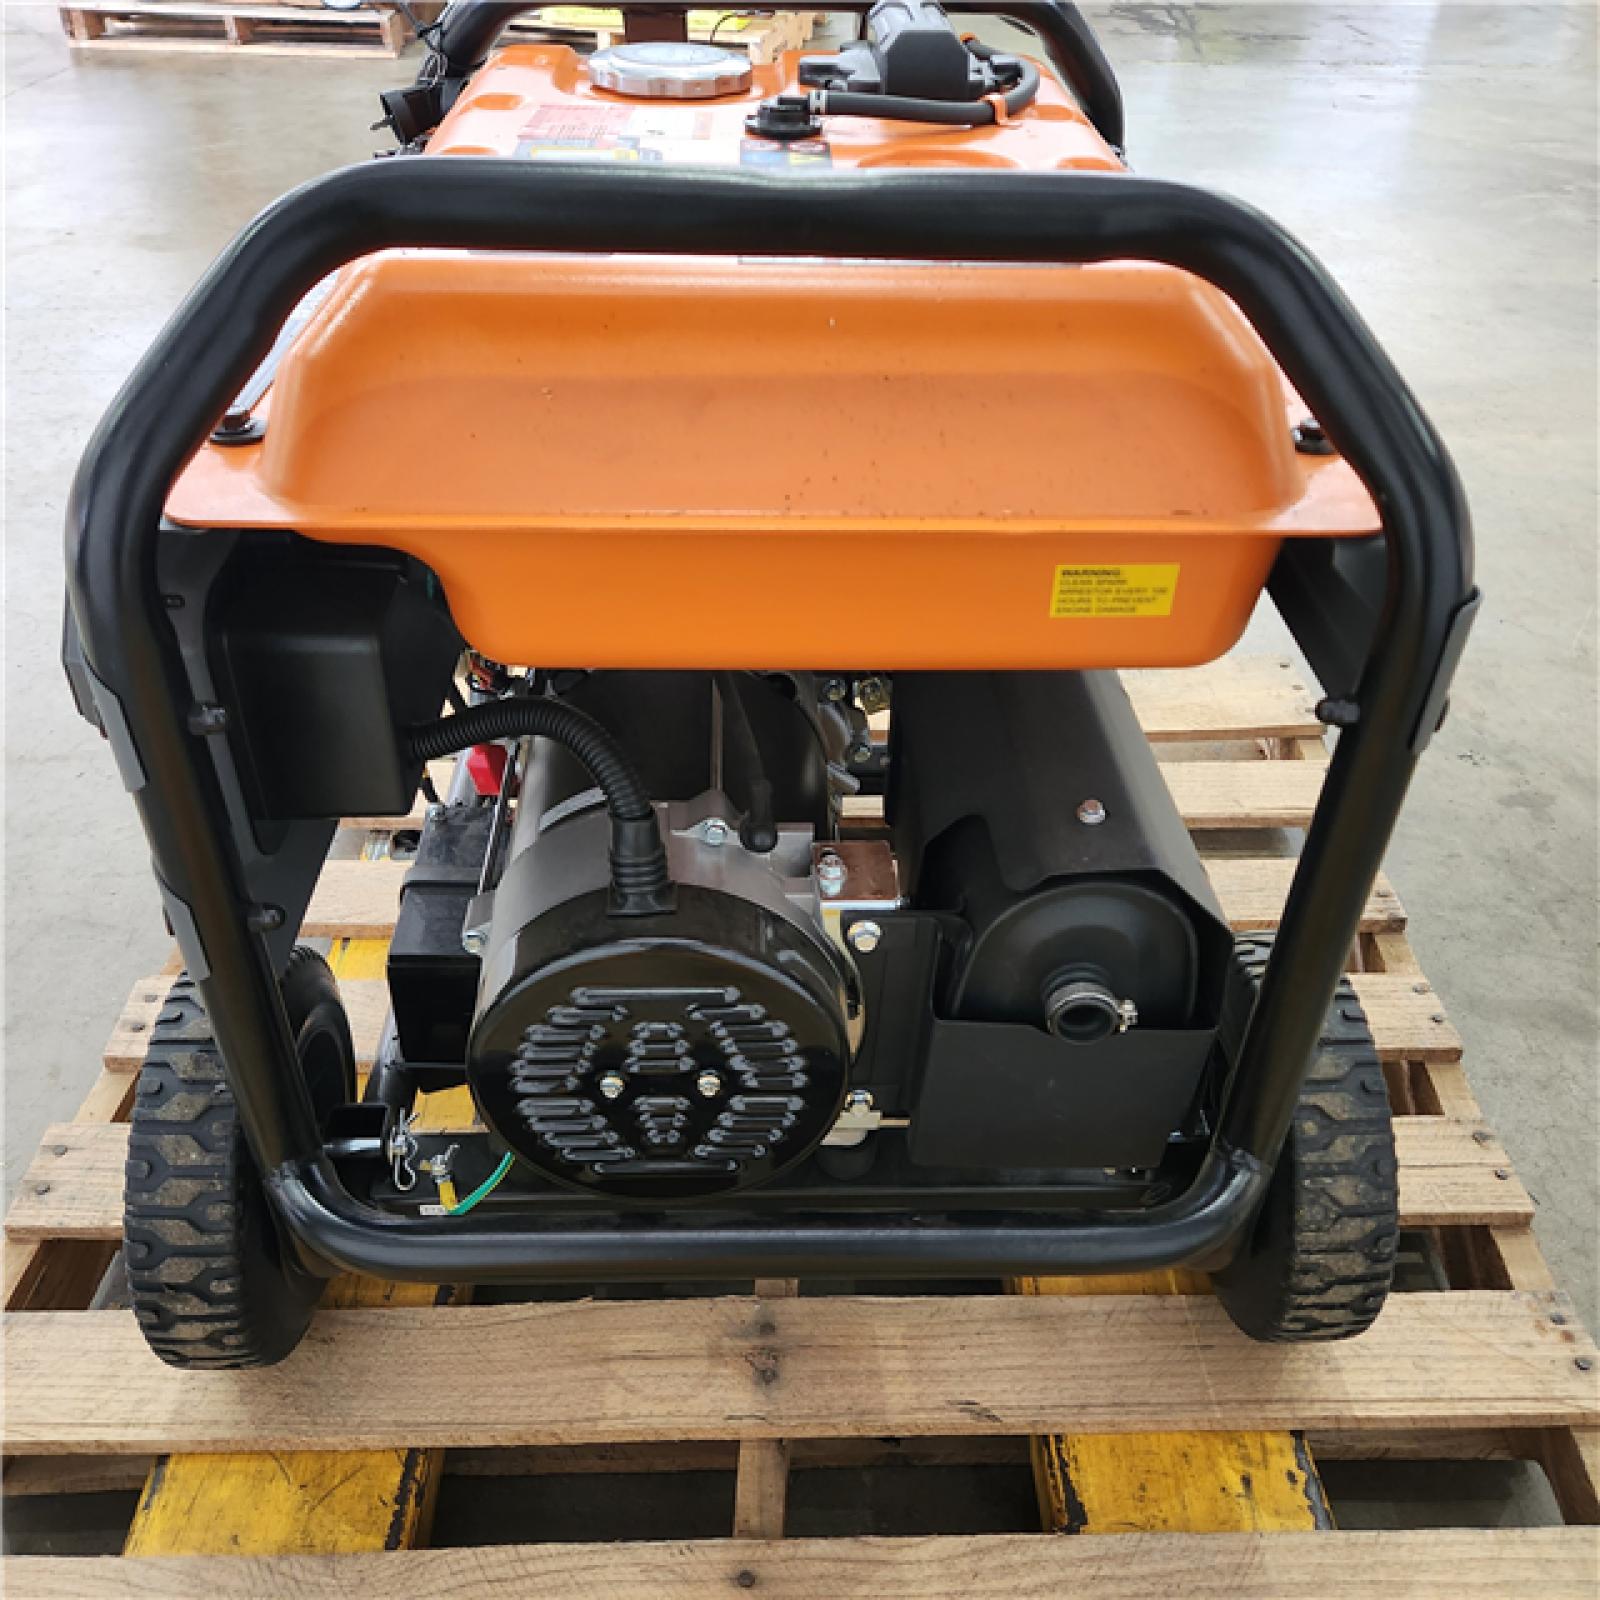 Houston Location - AS-IS Generac Electronic Fuel Injection 8500watts